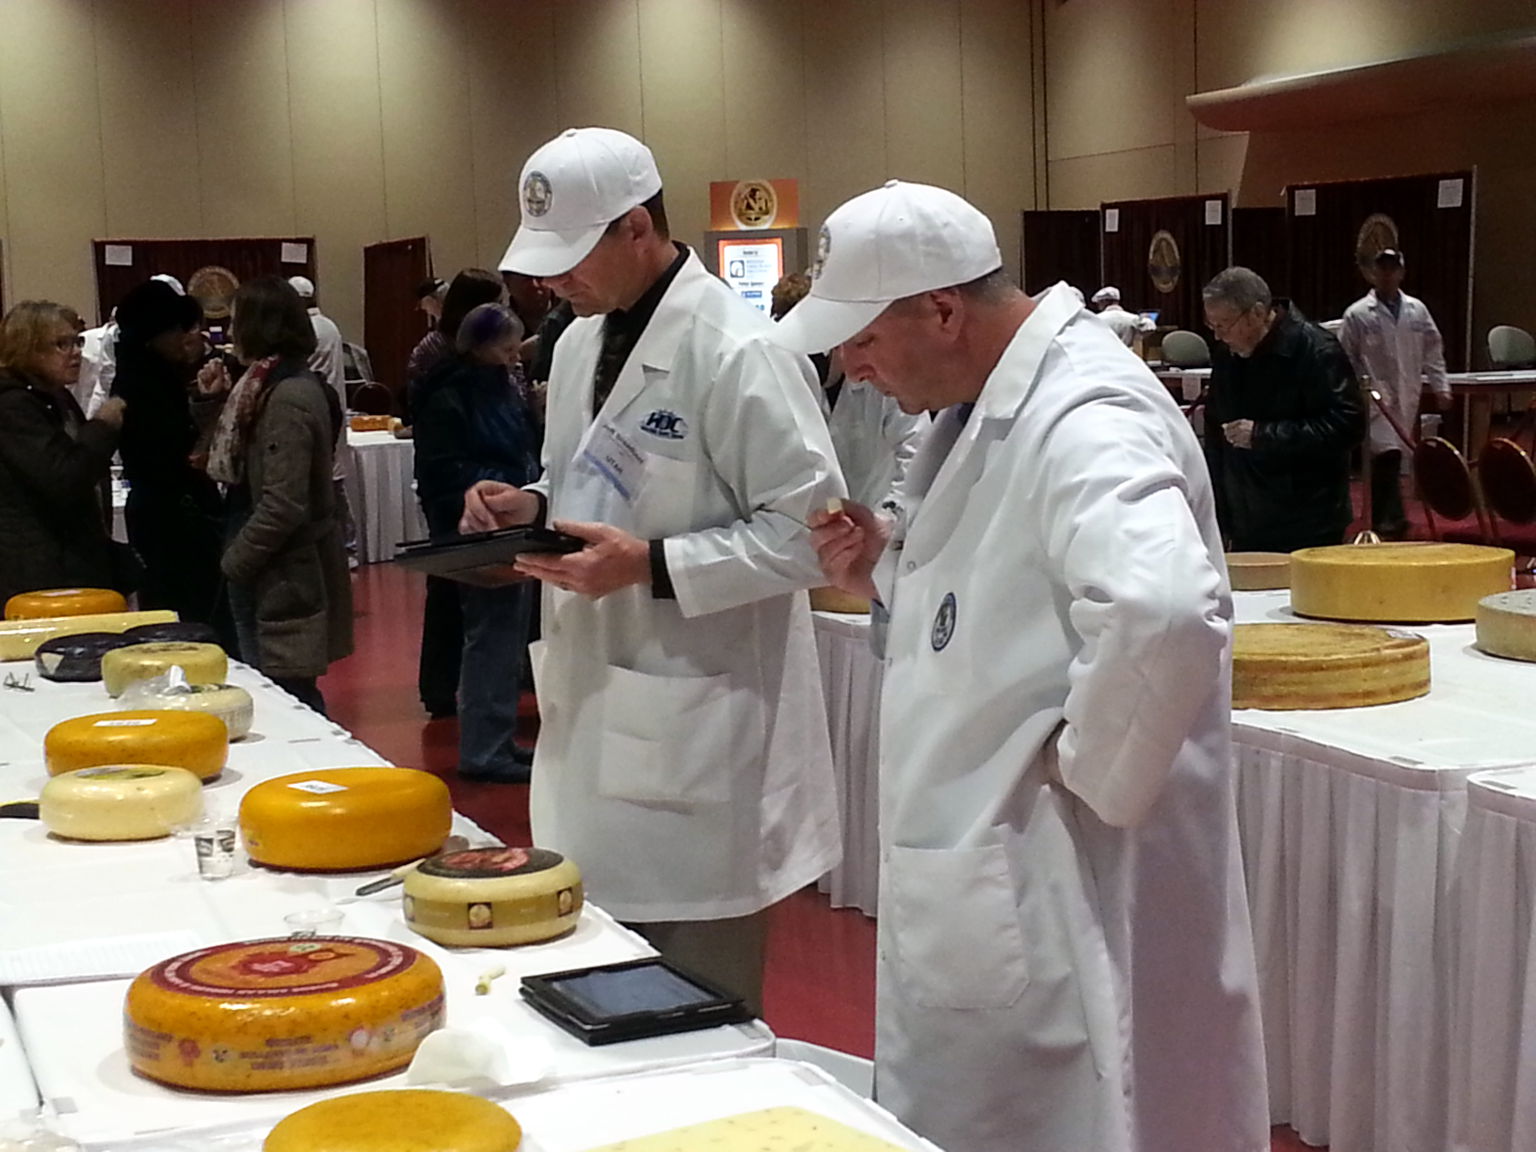 Judges at the 2014 World Cheese Championship